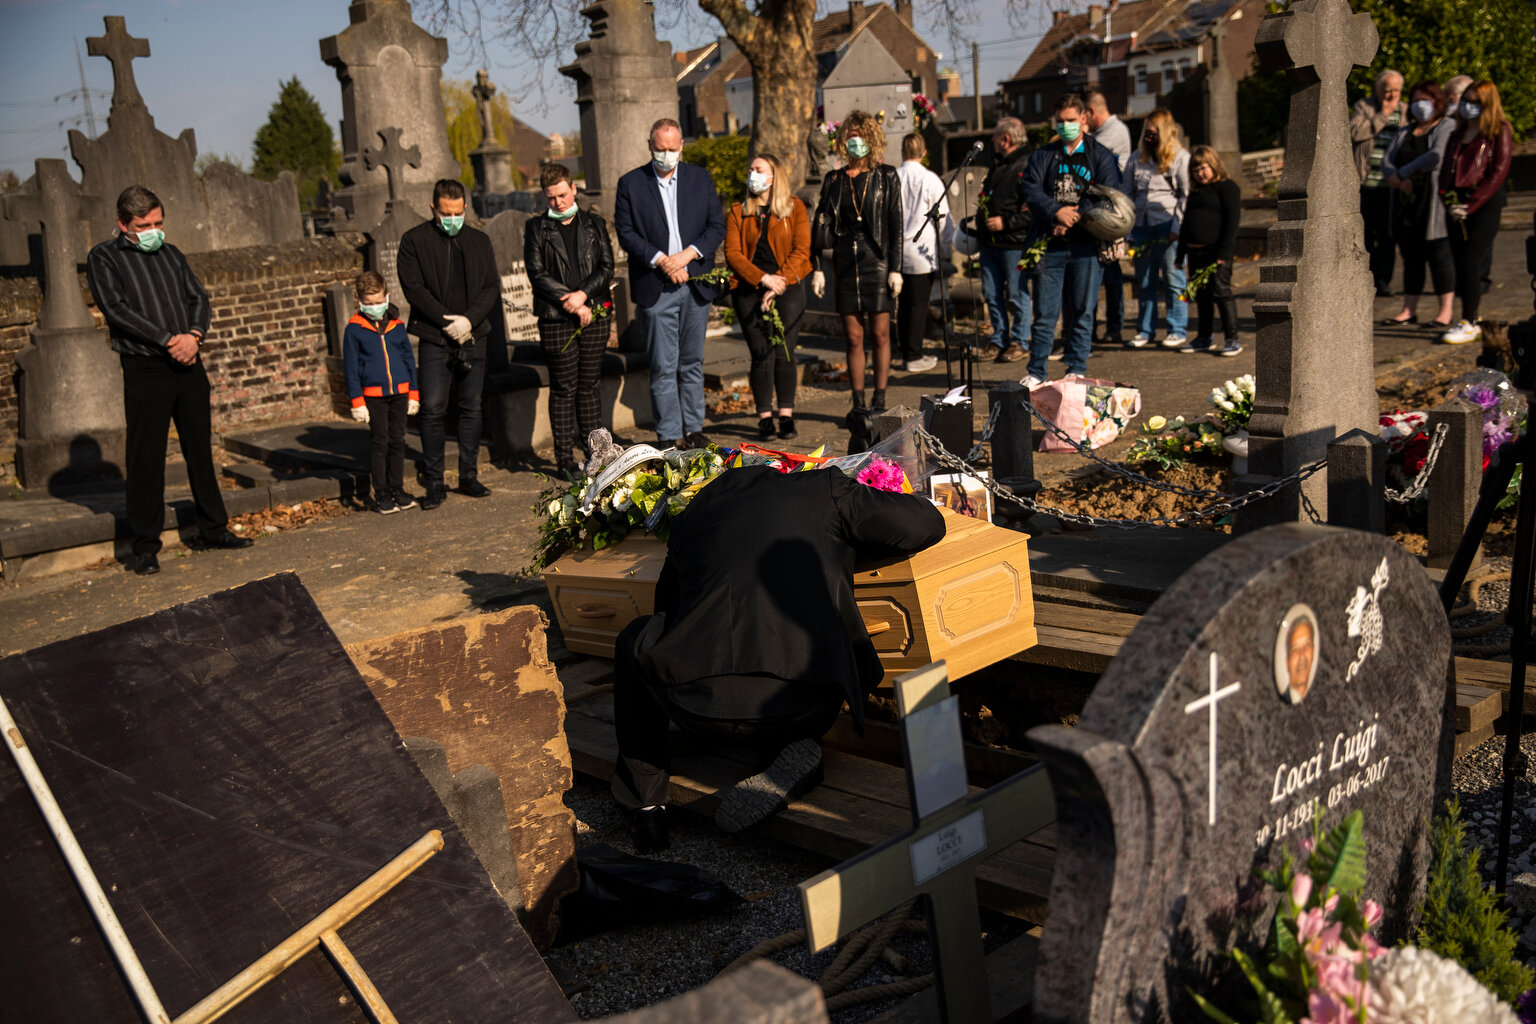  A relative of Margodt Genevieve, who died due to Covid-19, grieves over her coffin during her funeral ceremony at the Montignies cemetery in Charleroi, Belgium, Wednesday, April 8, 2020.  (AP Photo/Francisco Seco) 